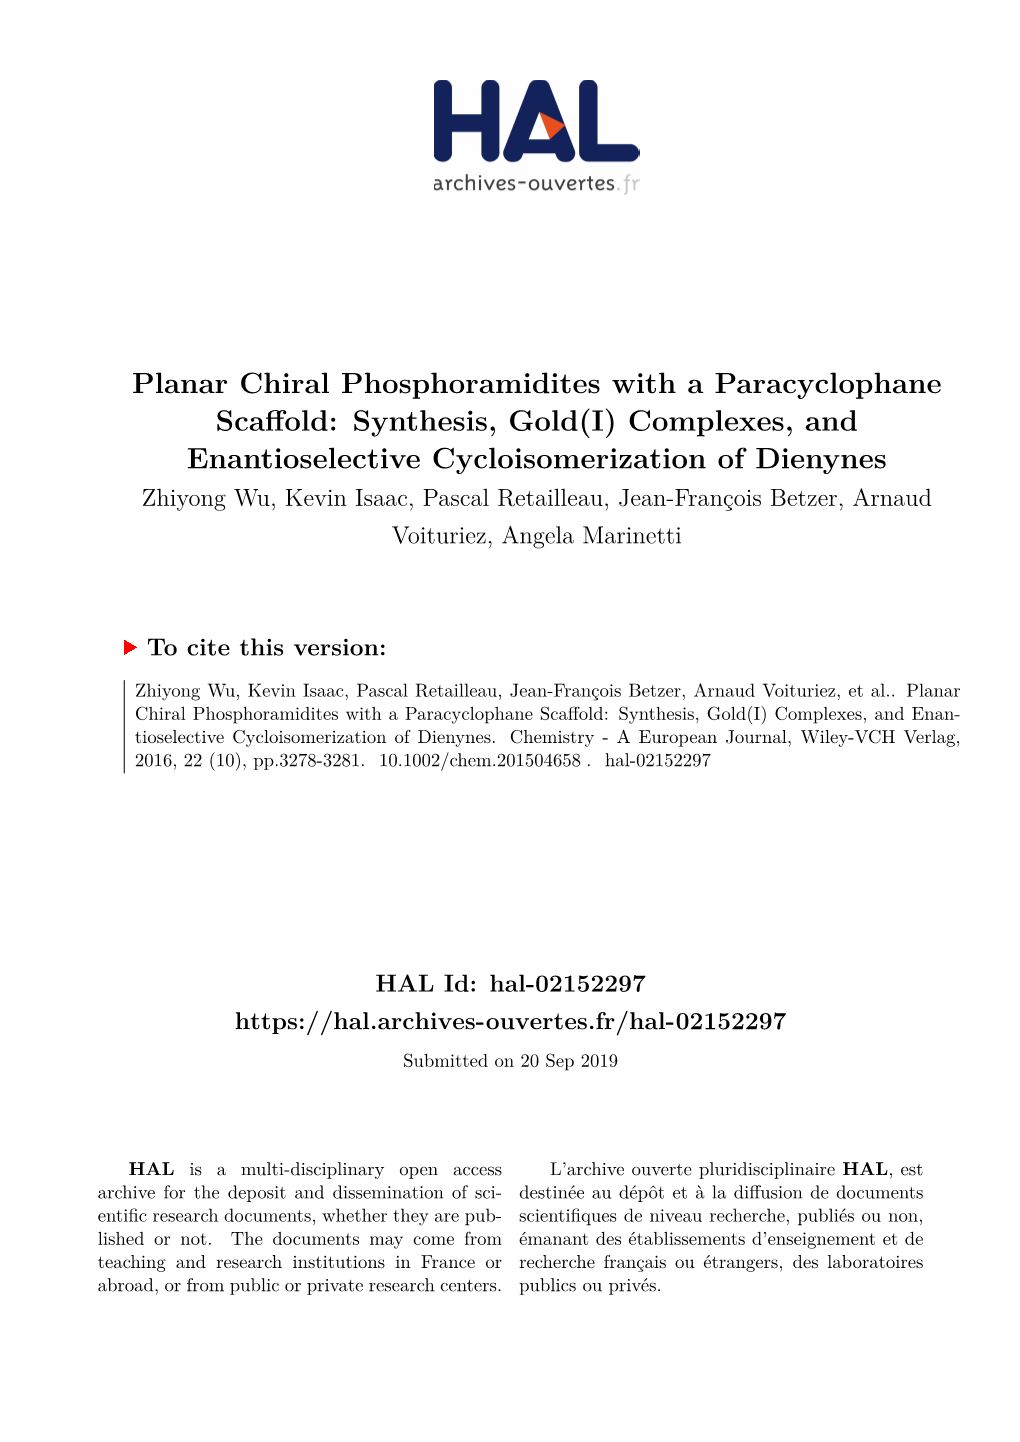 Planar Chiral Phosphoramidites with A